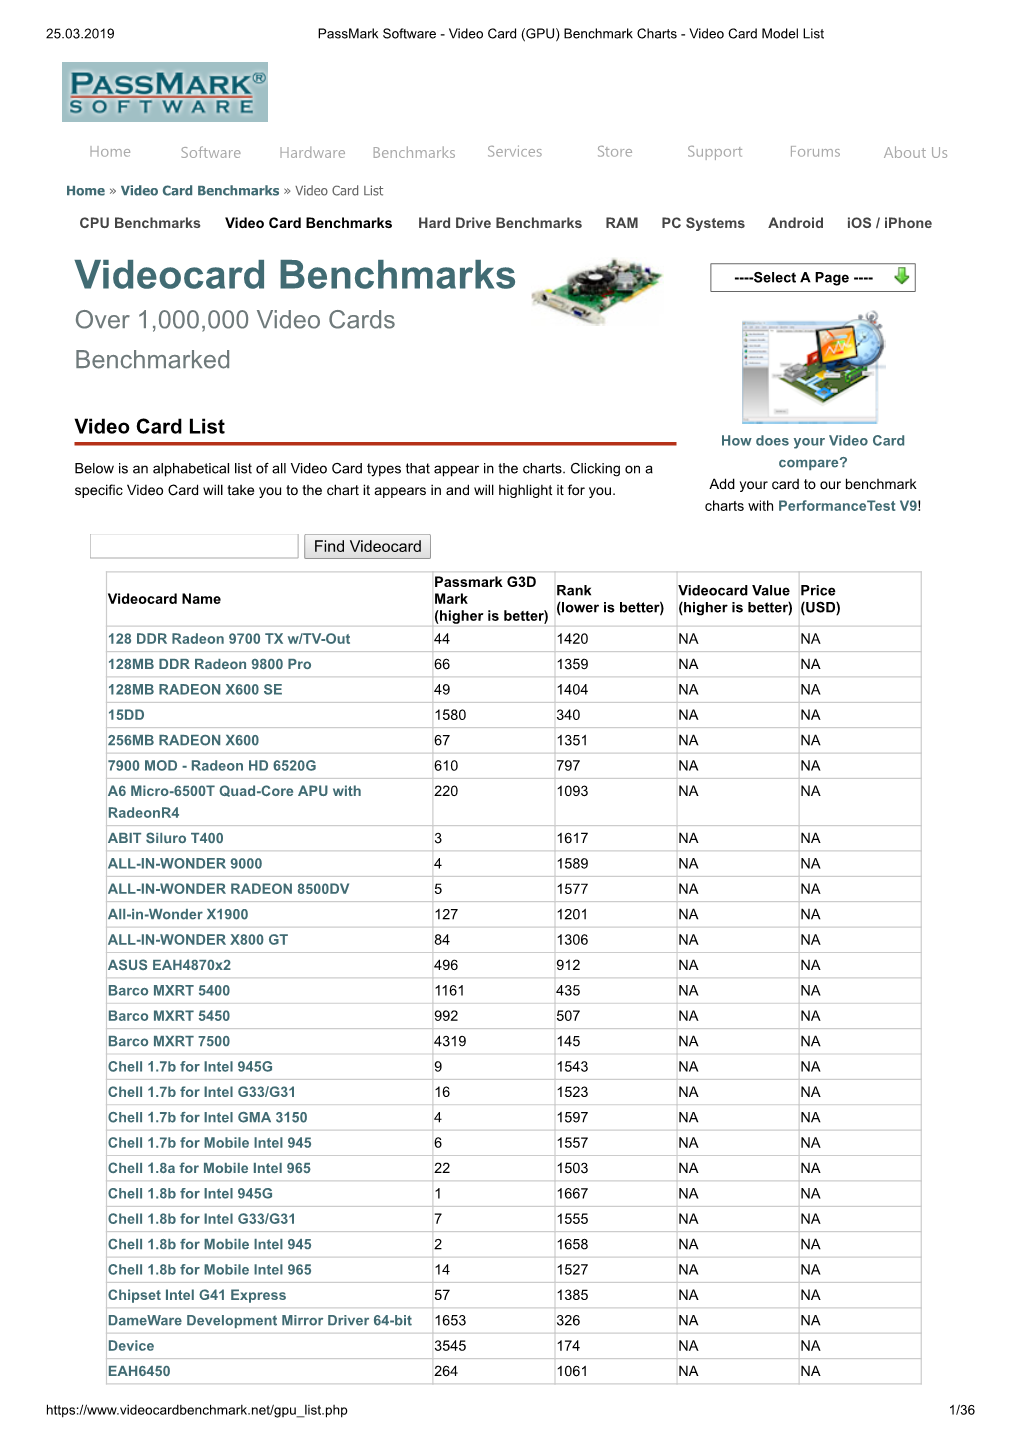 Videocard Benchmarks ----Select a Page ---- Over 1,000,000 Video Cards Benchmarked